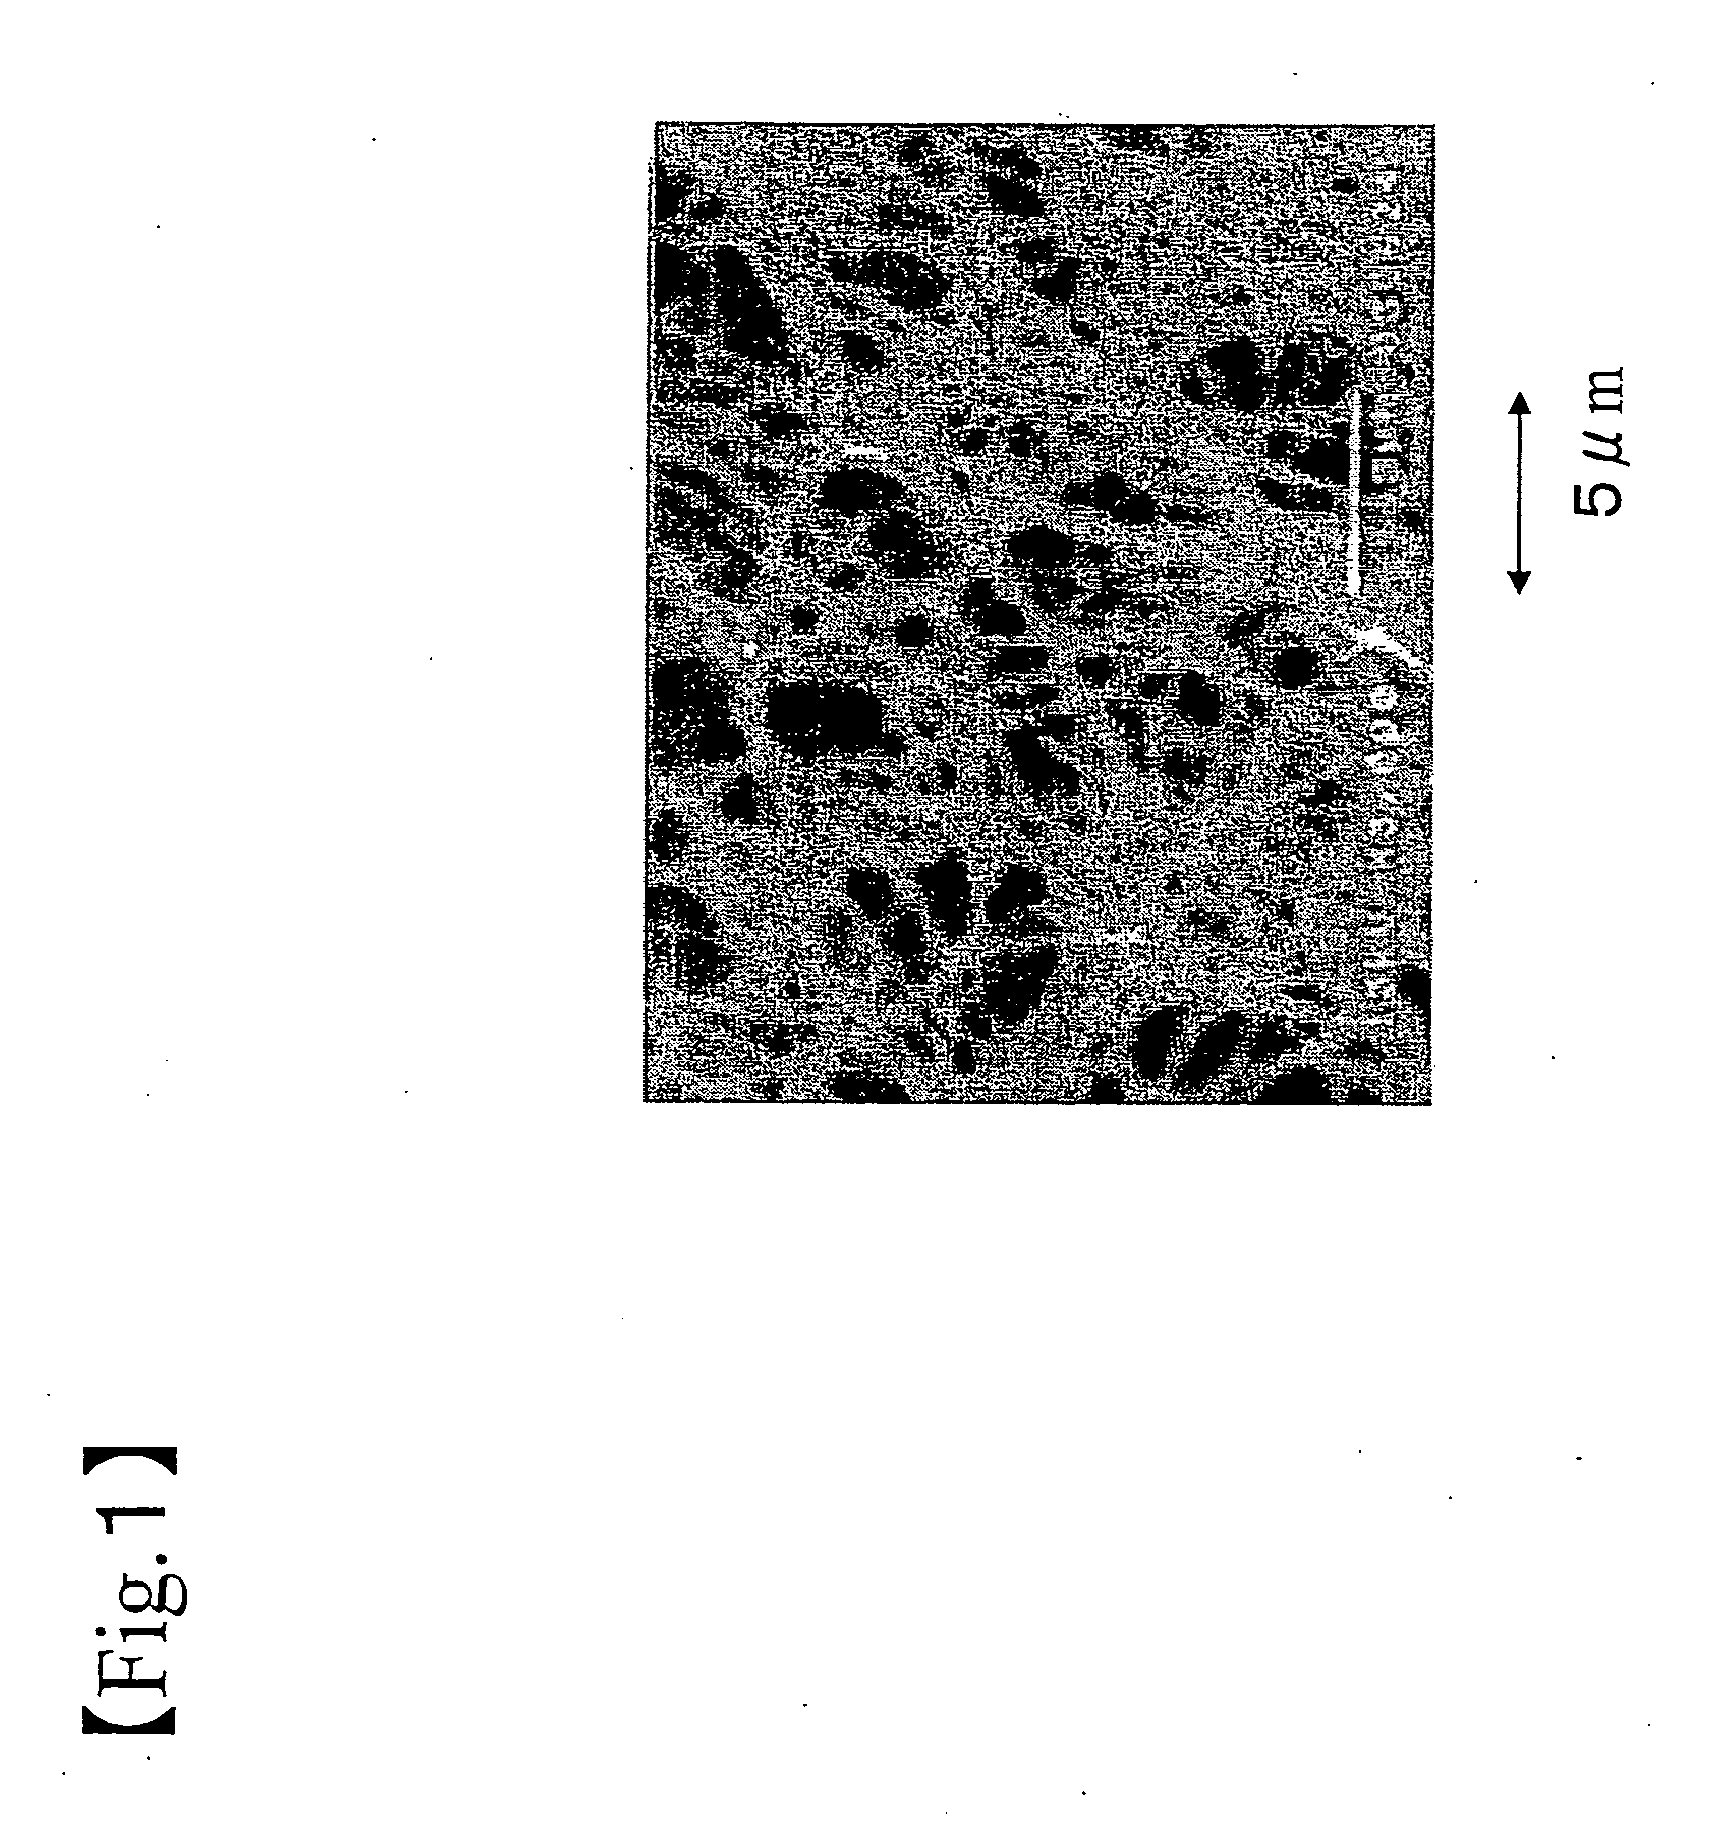 Process for producing spongelike structure